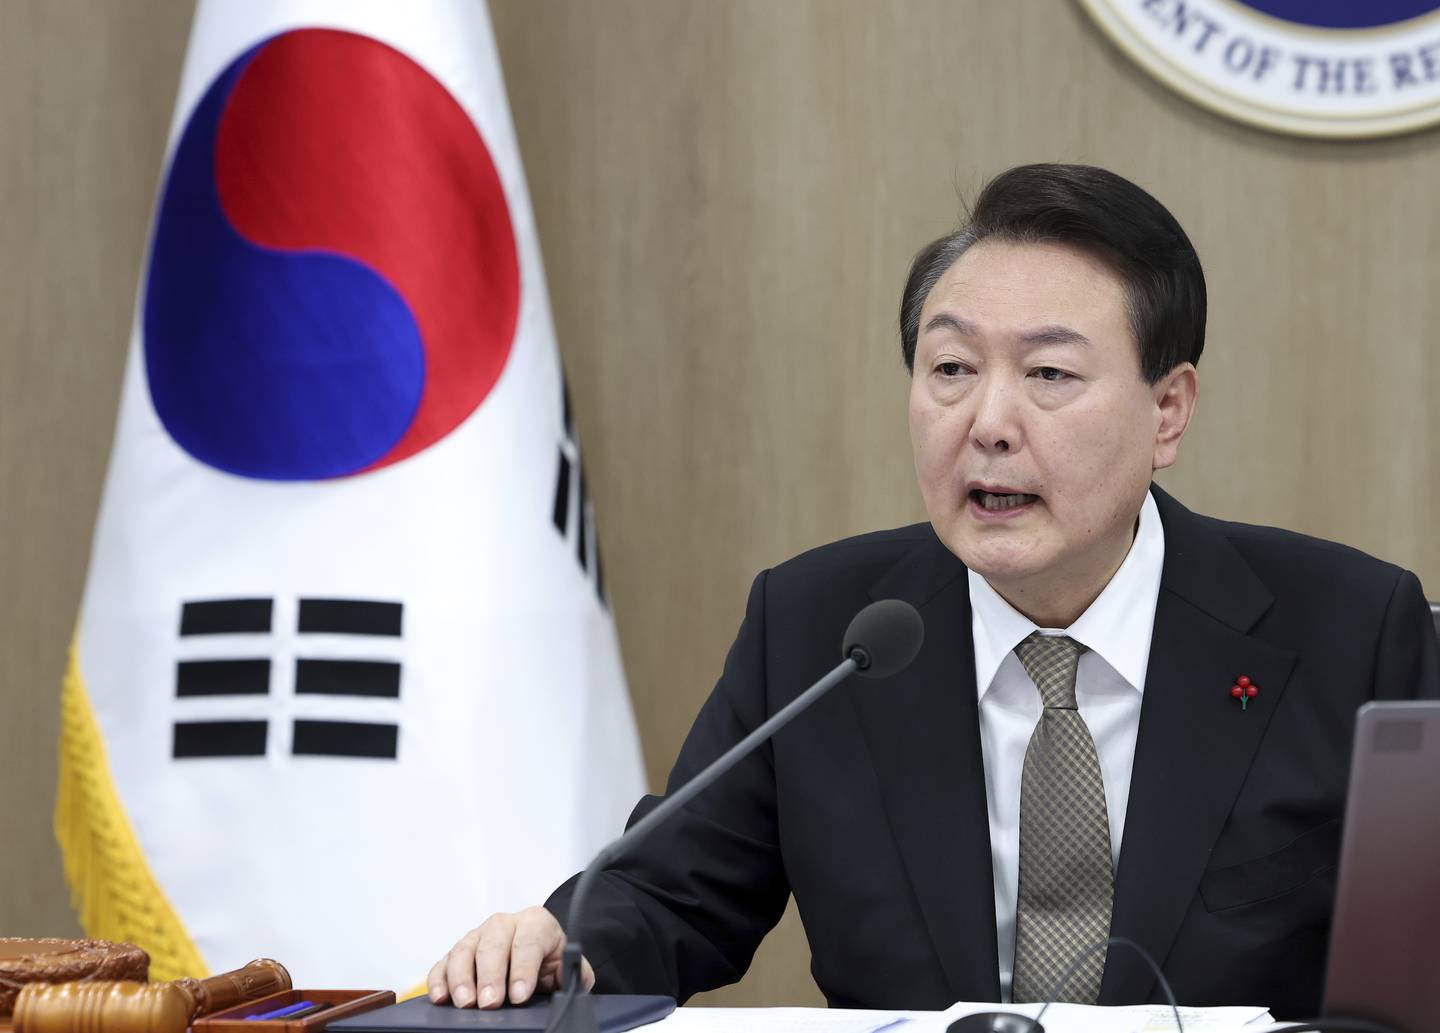 South Korean President Yoon Suk Yeol speaks during a cabinet council meeting at the presidential office in Seoul, South Korea, Tuesday, Dec. 27, 2022.